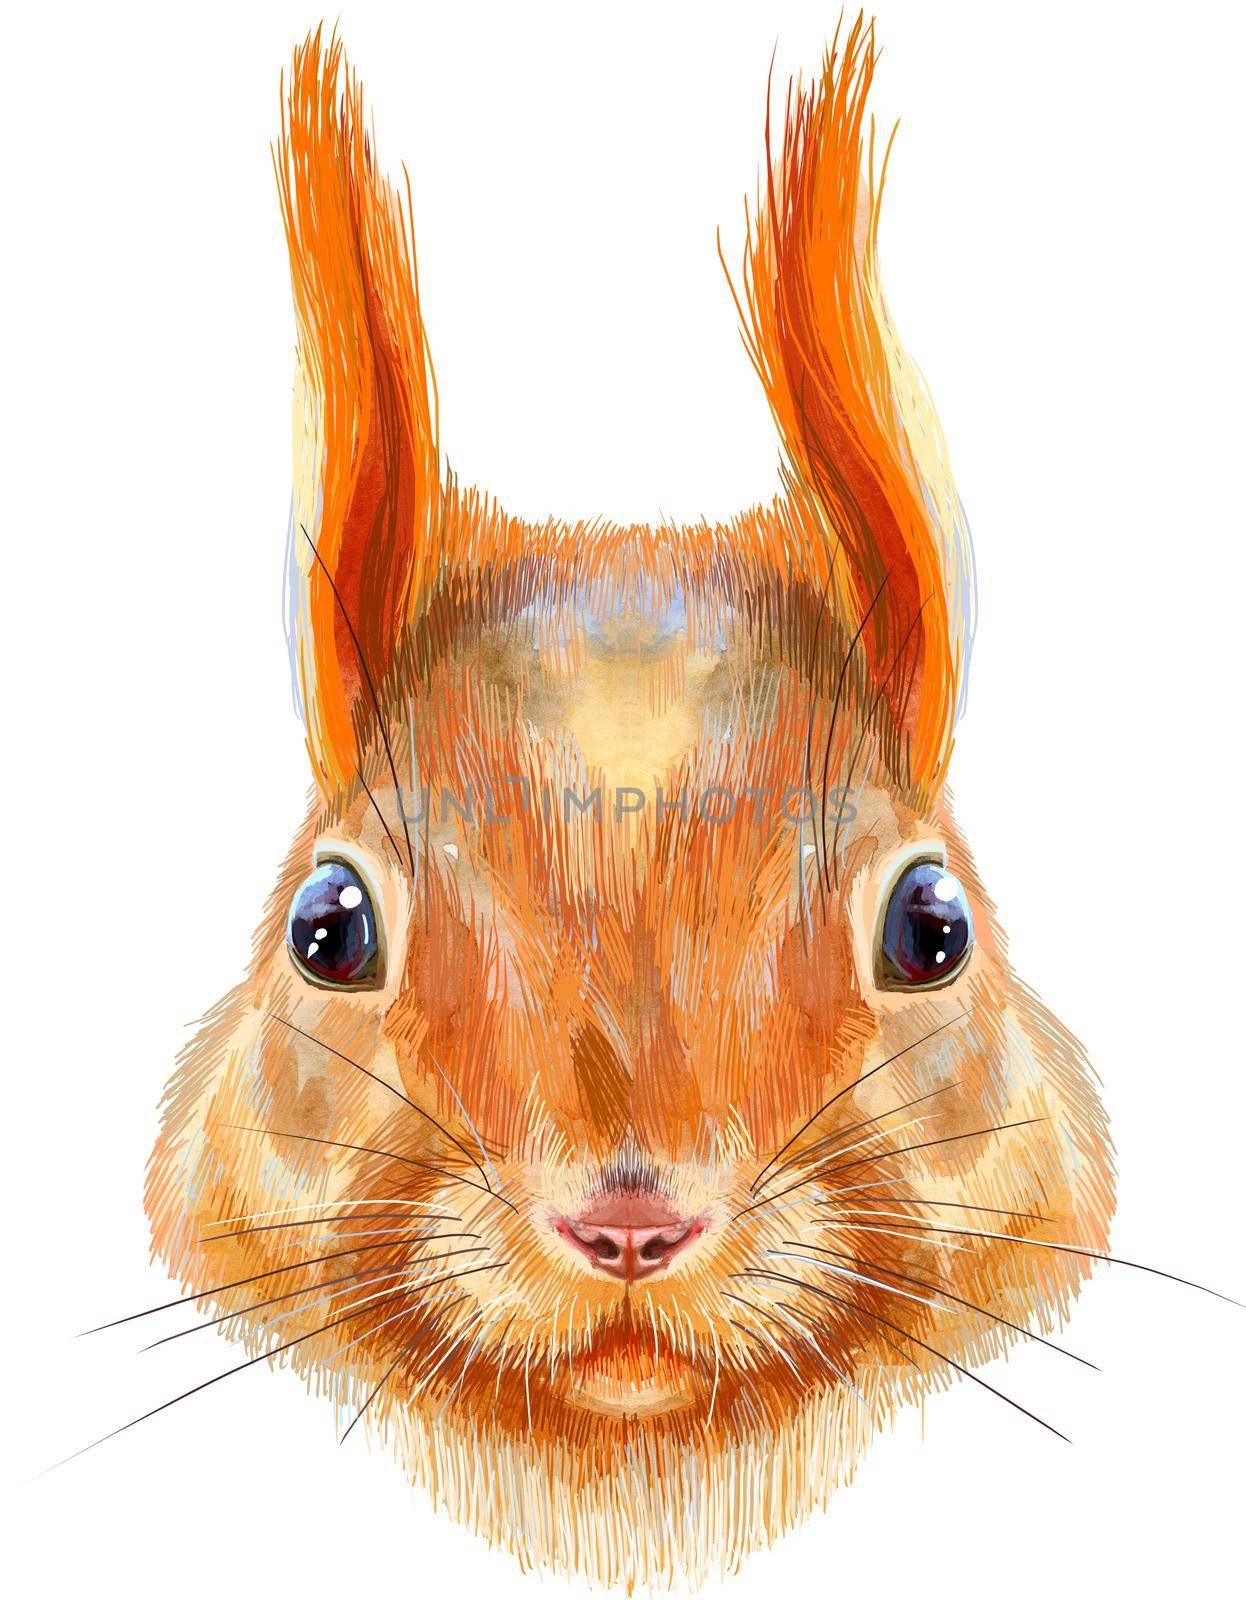 Watercolor portrait of a squirrel on a white background. Cute forest animal for your design